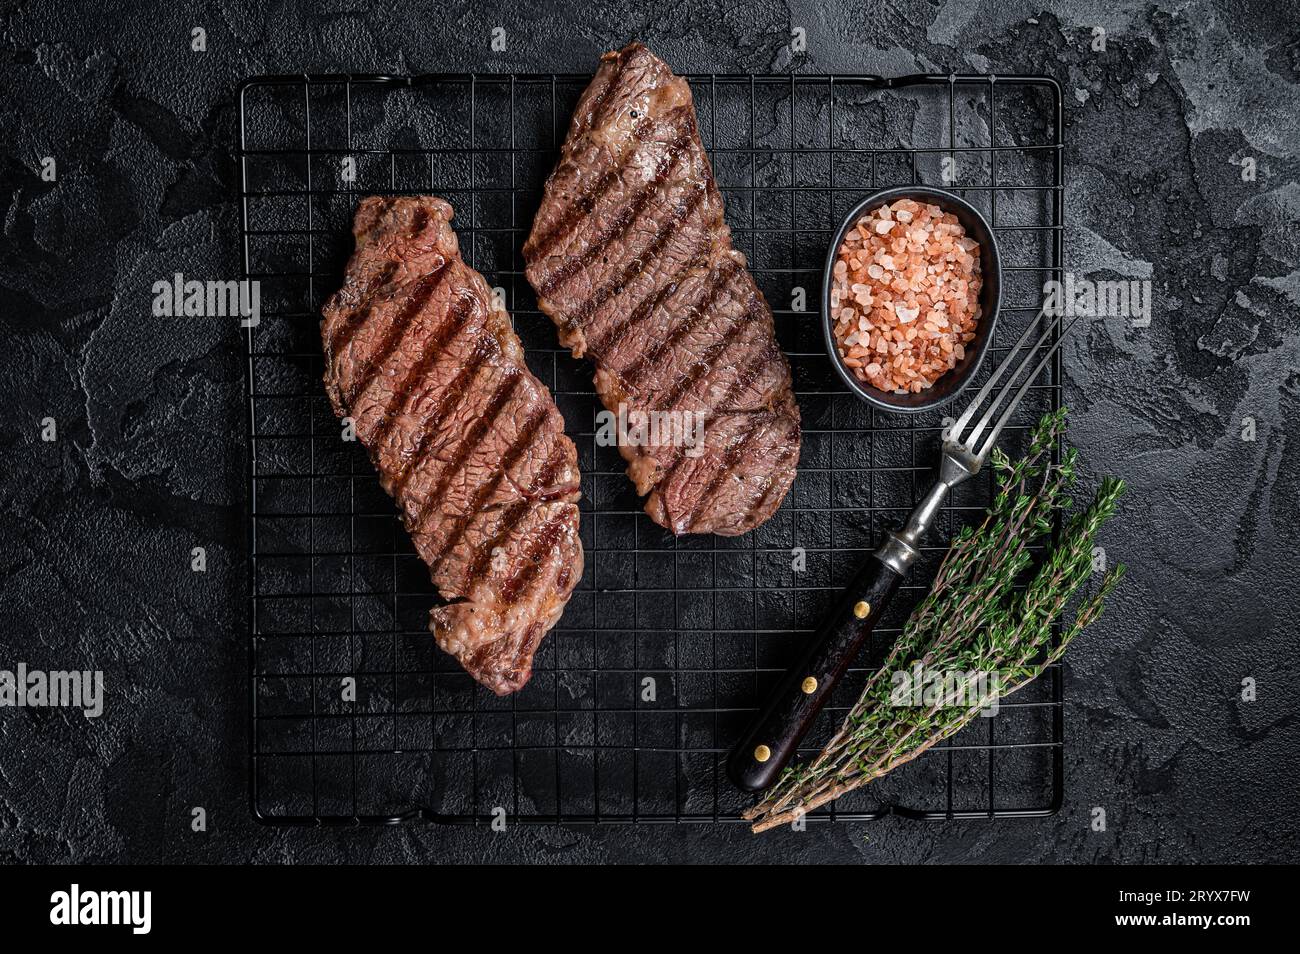 Grilled denver beef meat steak on a rack. Black background. Top view. Stock Photo